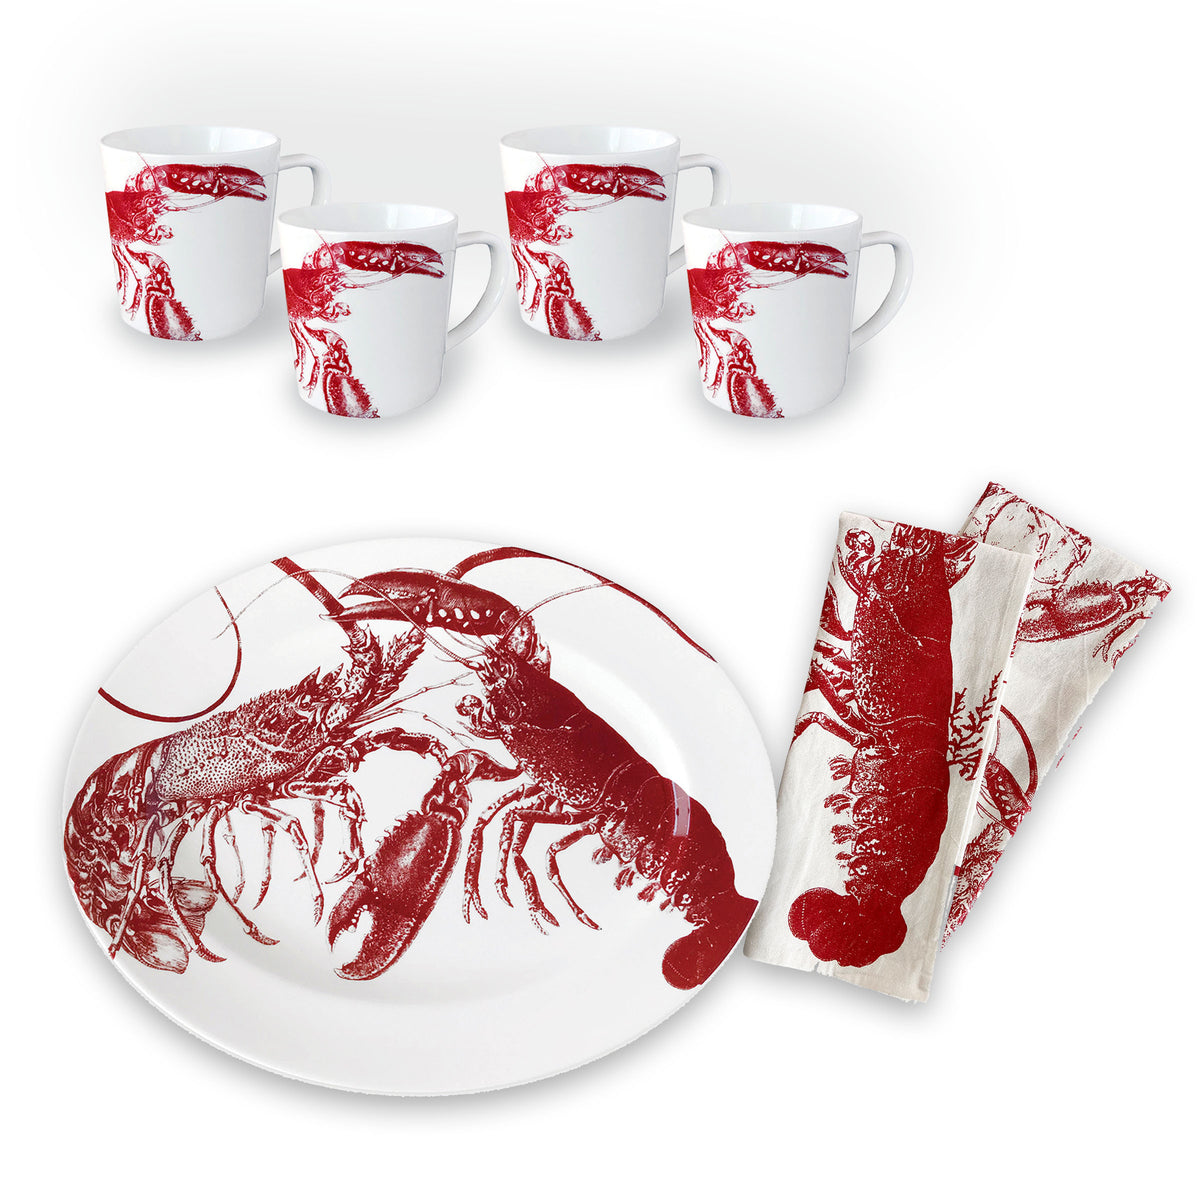 A set of tableware featuring charming red lobster designs, including four lobster mugs, a large lobster platter, and two cloth napkins is now available as the Father&#39;s Day Bundle from Caskata.